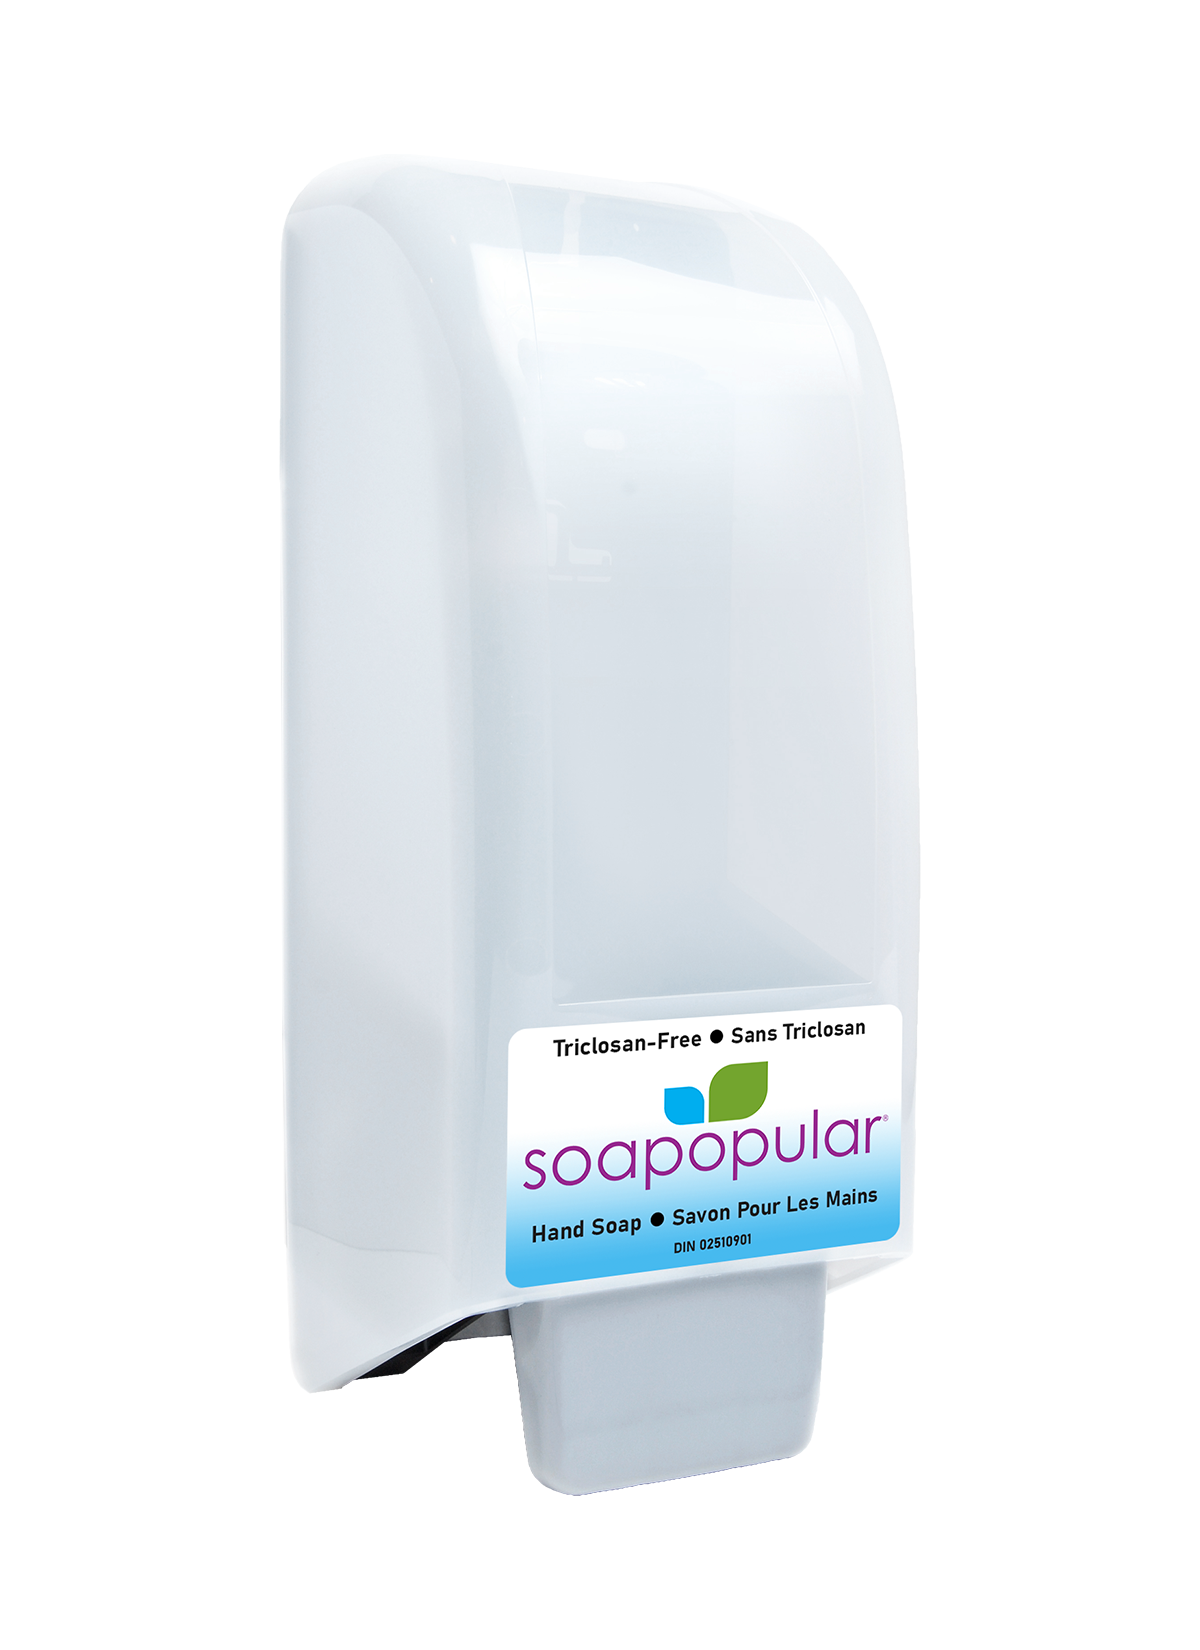 Soapopular® Triclosan-Free Covered Manual Dispenser + Refill Package